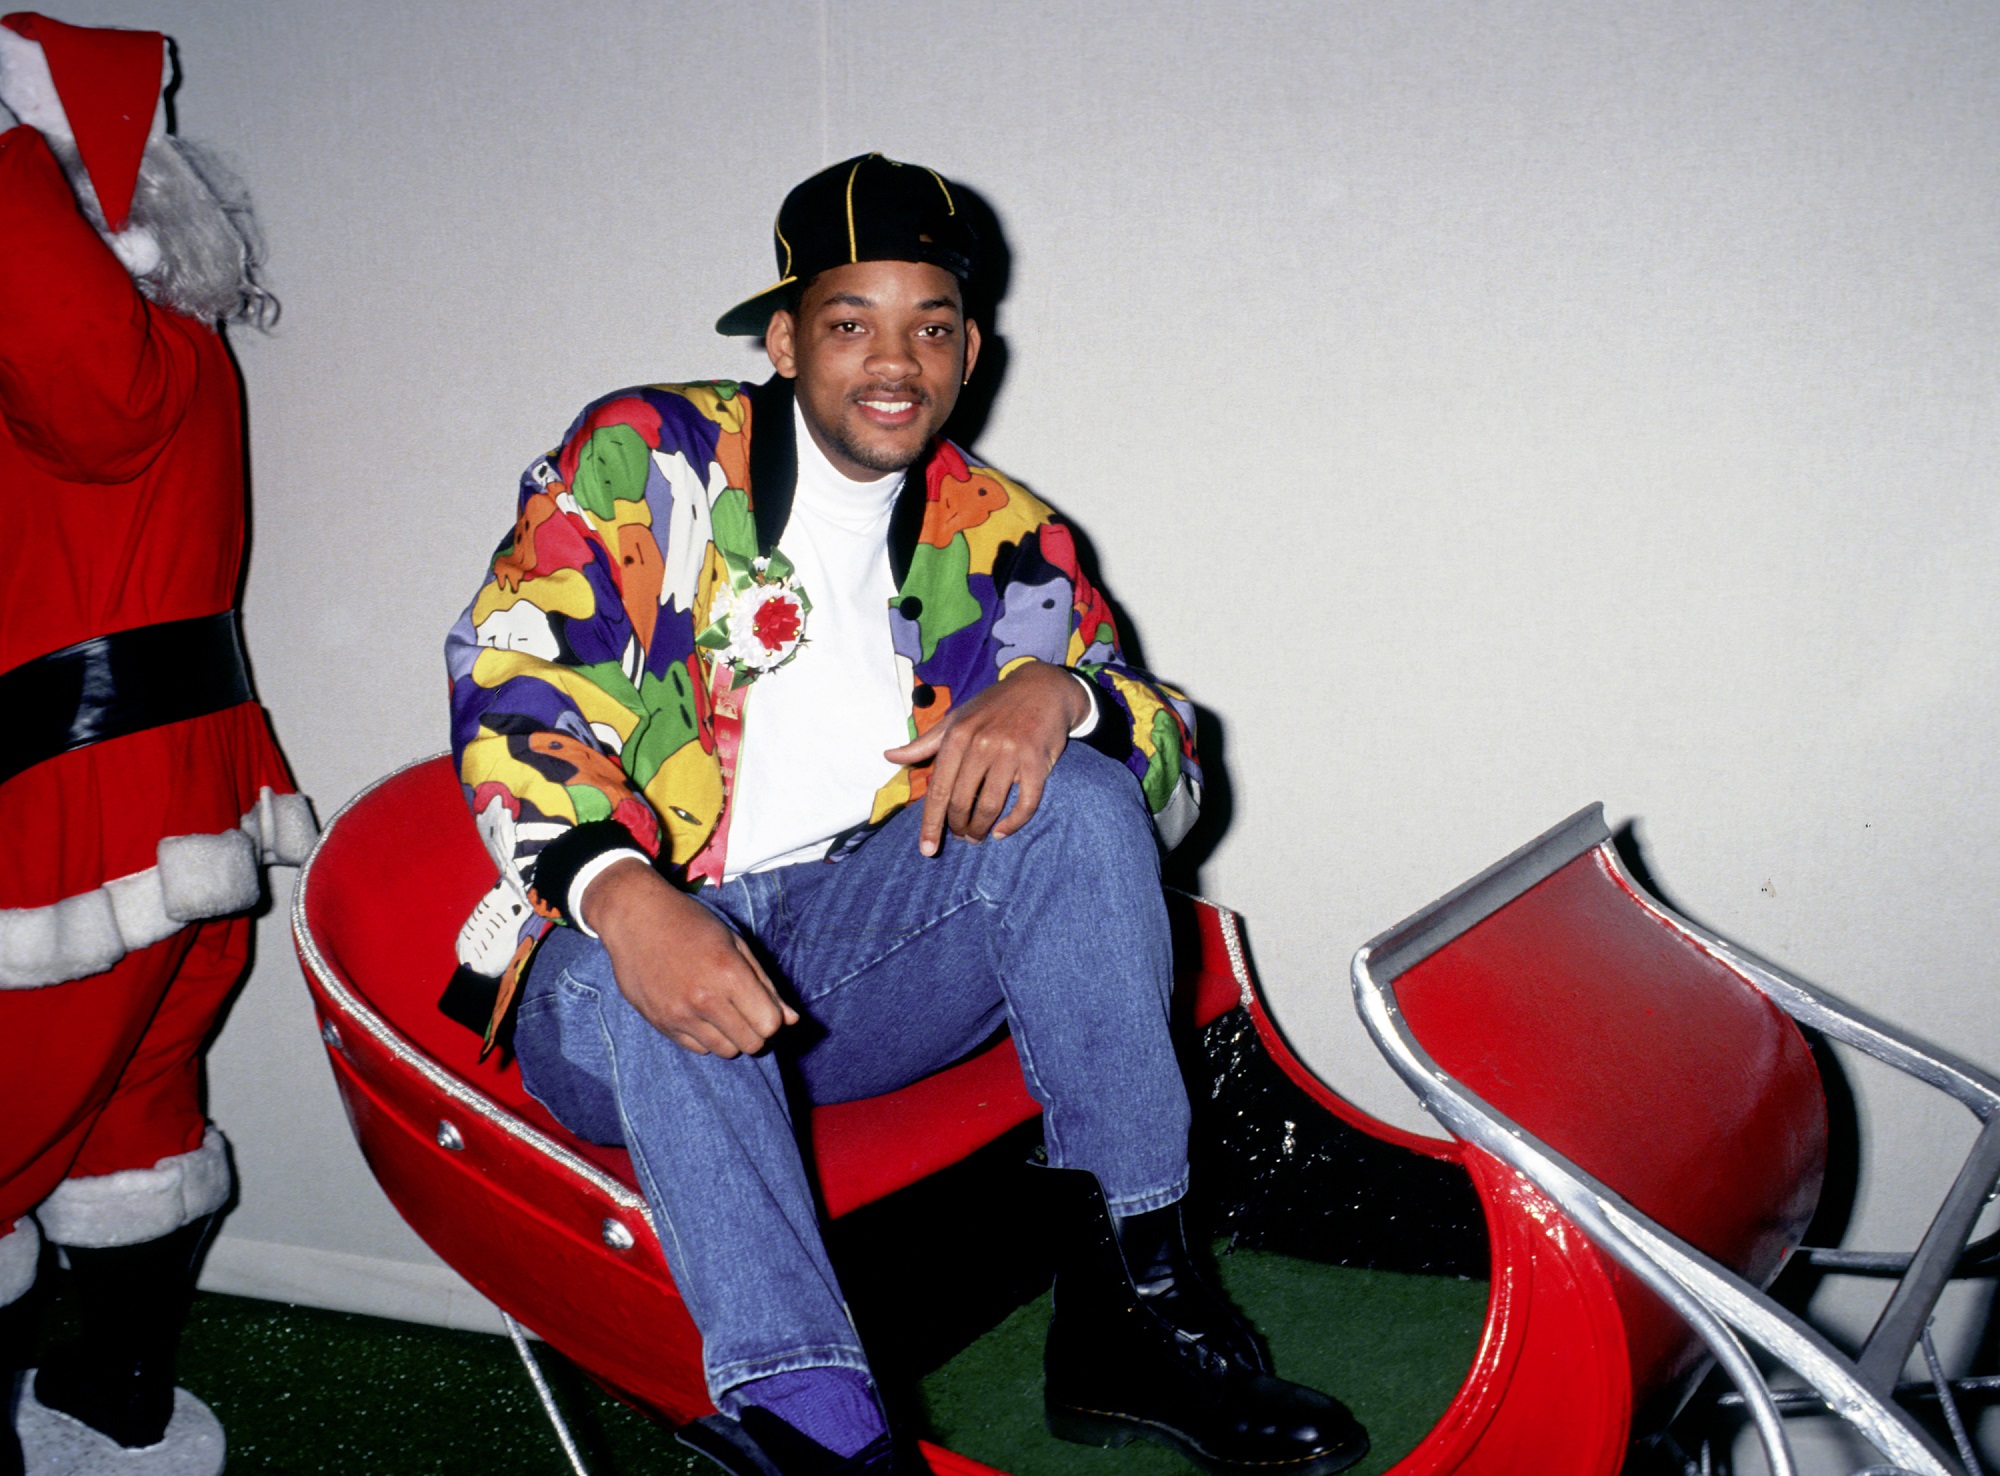 Will Smith as the Fresh Prince